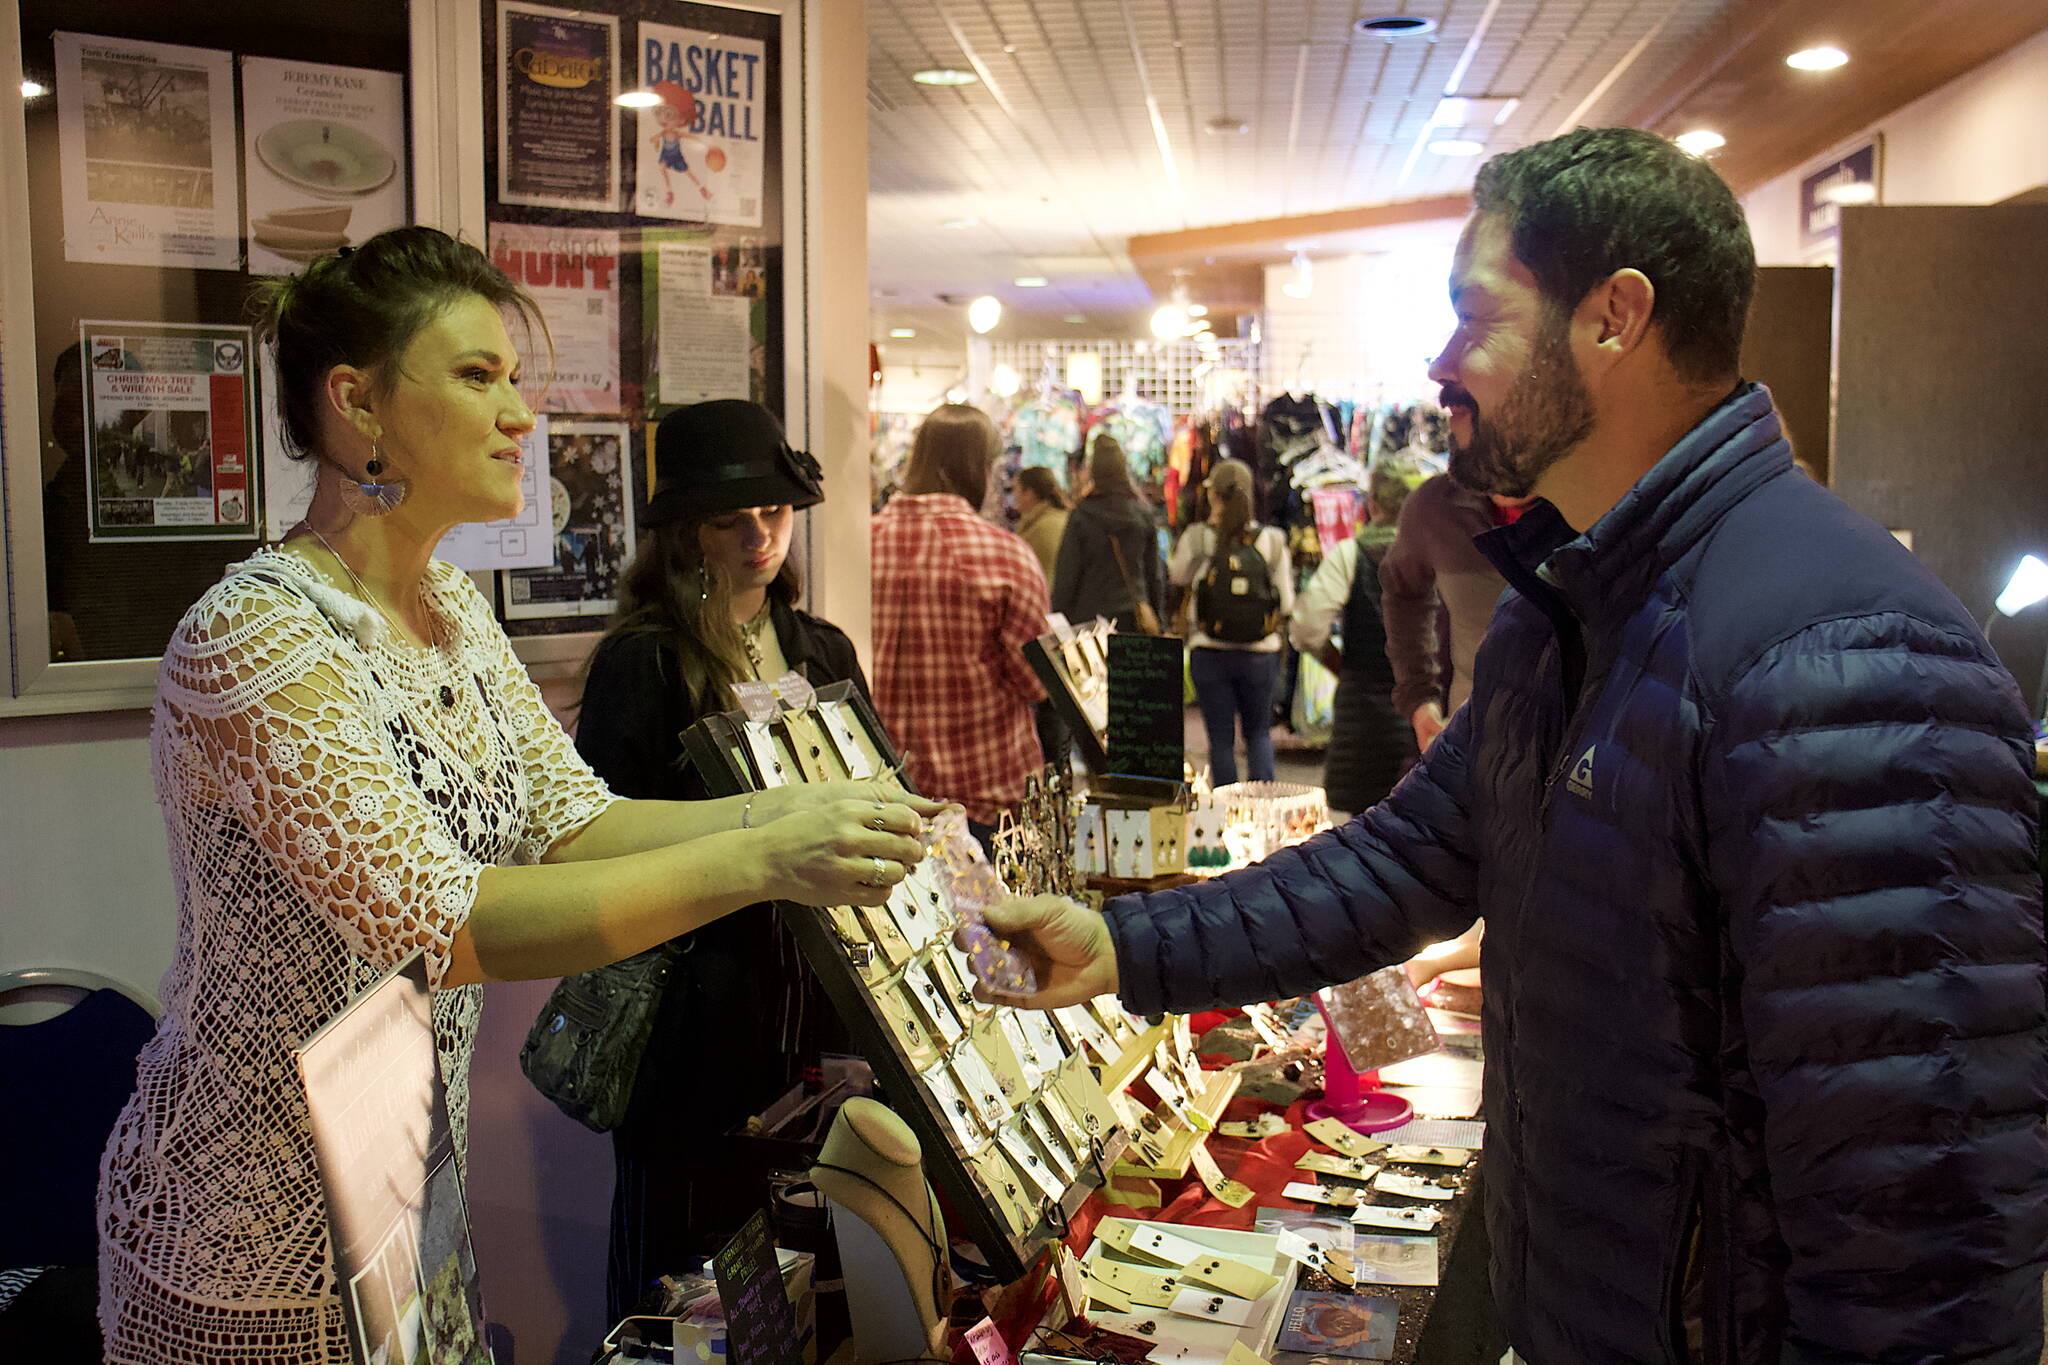 Bonnie Ritchie (left), owner of Ritchie’s Rocks in Wrangell, hands a purchase to a customer at the Juneau Public Market at Centennial Hall on Saturday. (Mark Sabbatini / Juneau Empire)